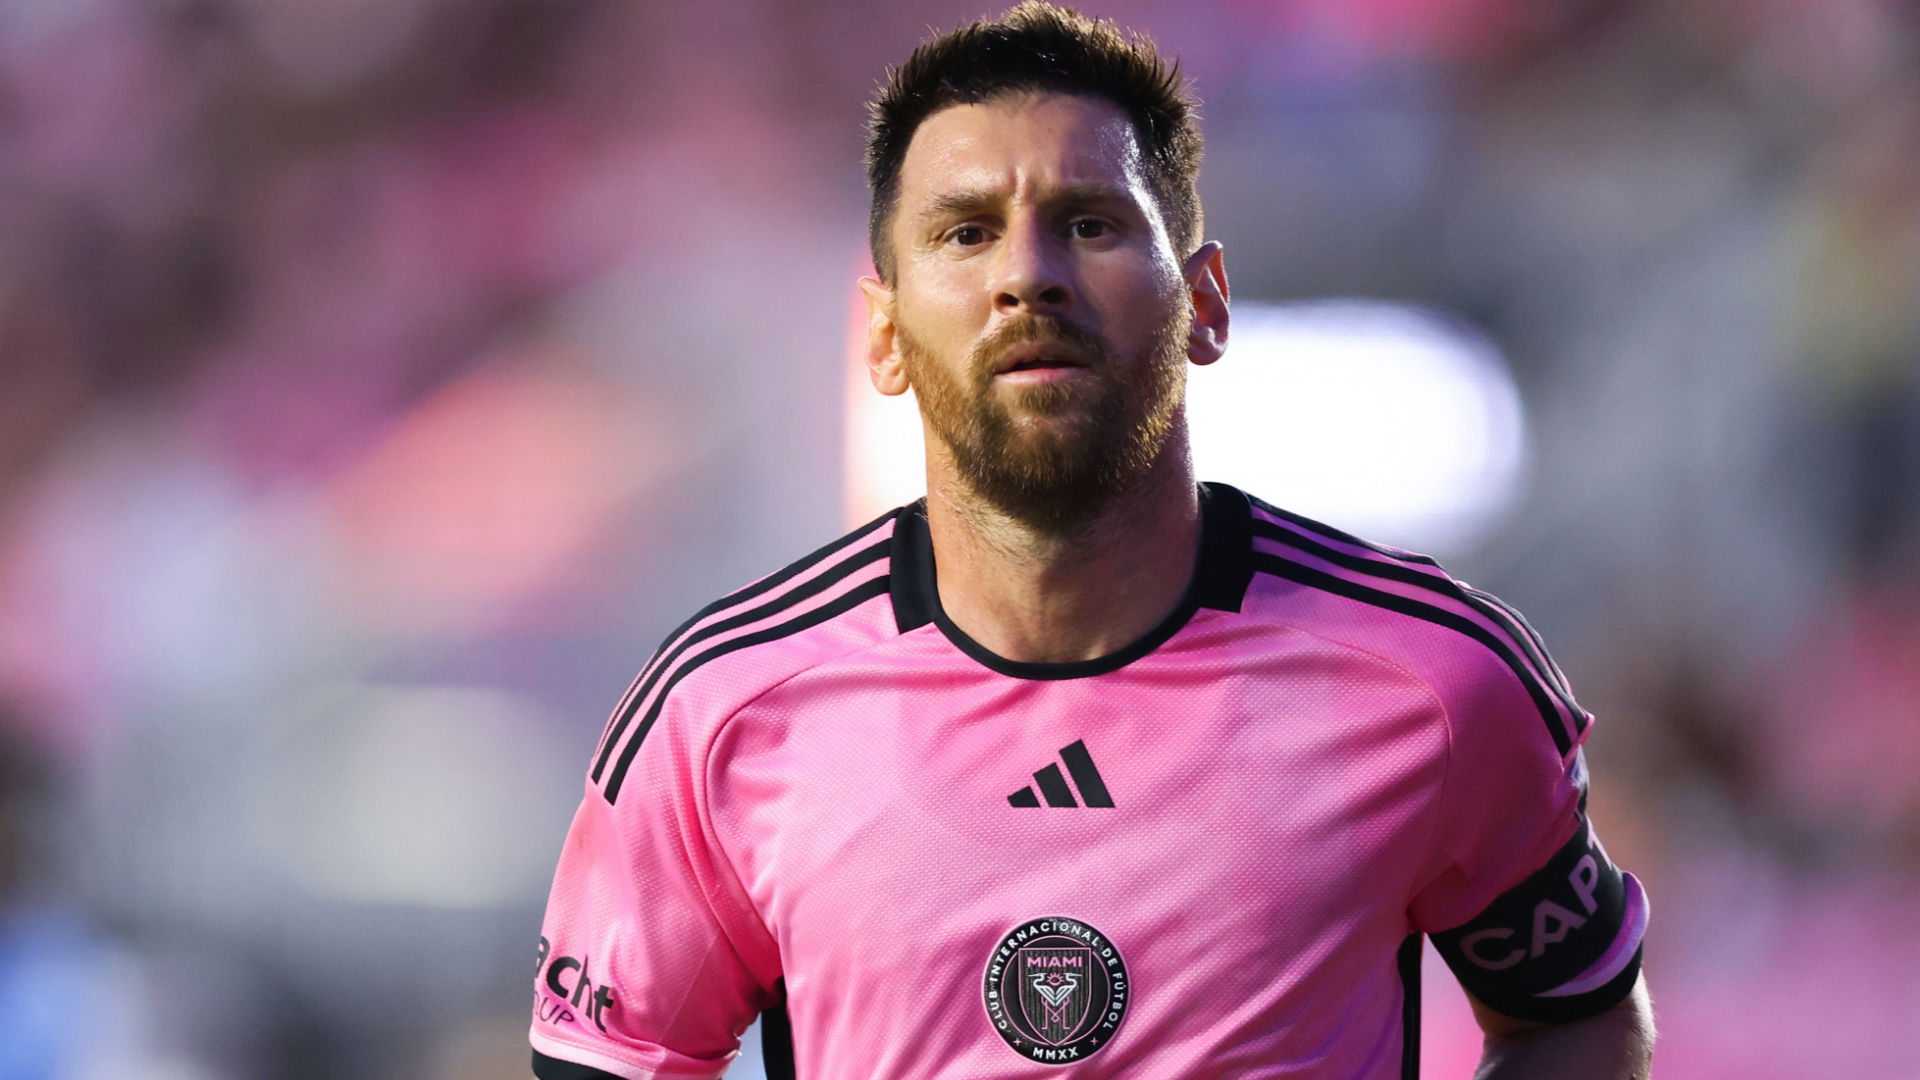 Lionel Messi declared fit! Inter Miami expect Argentina star to feature against St Louis City in final appearance before Copa America trip